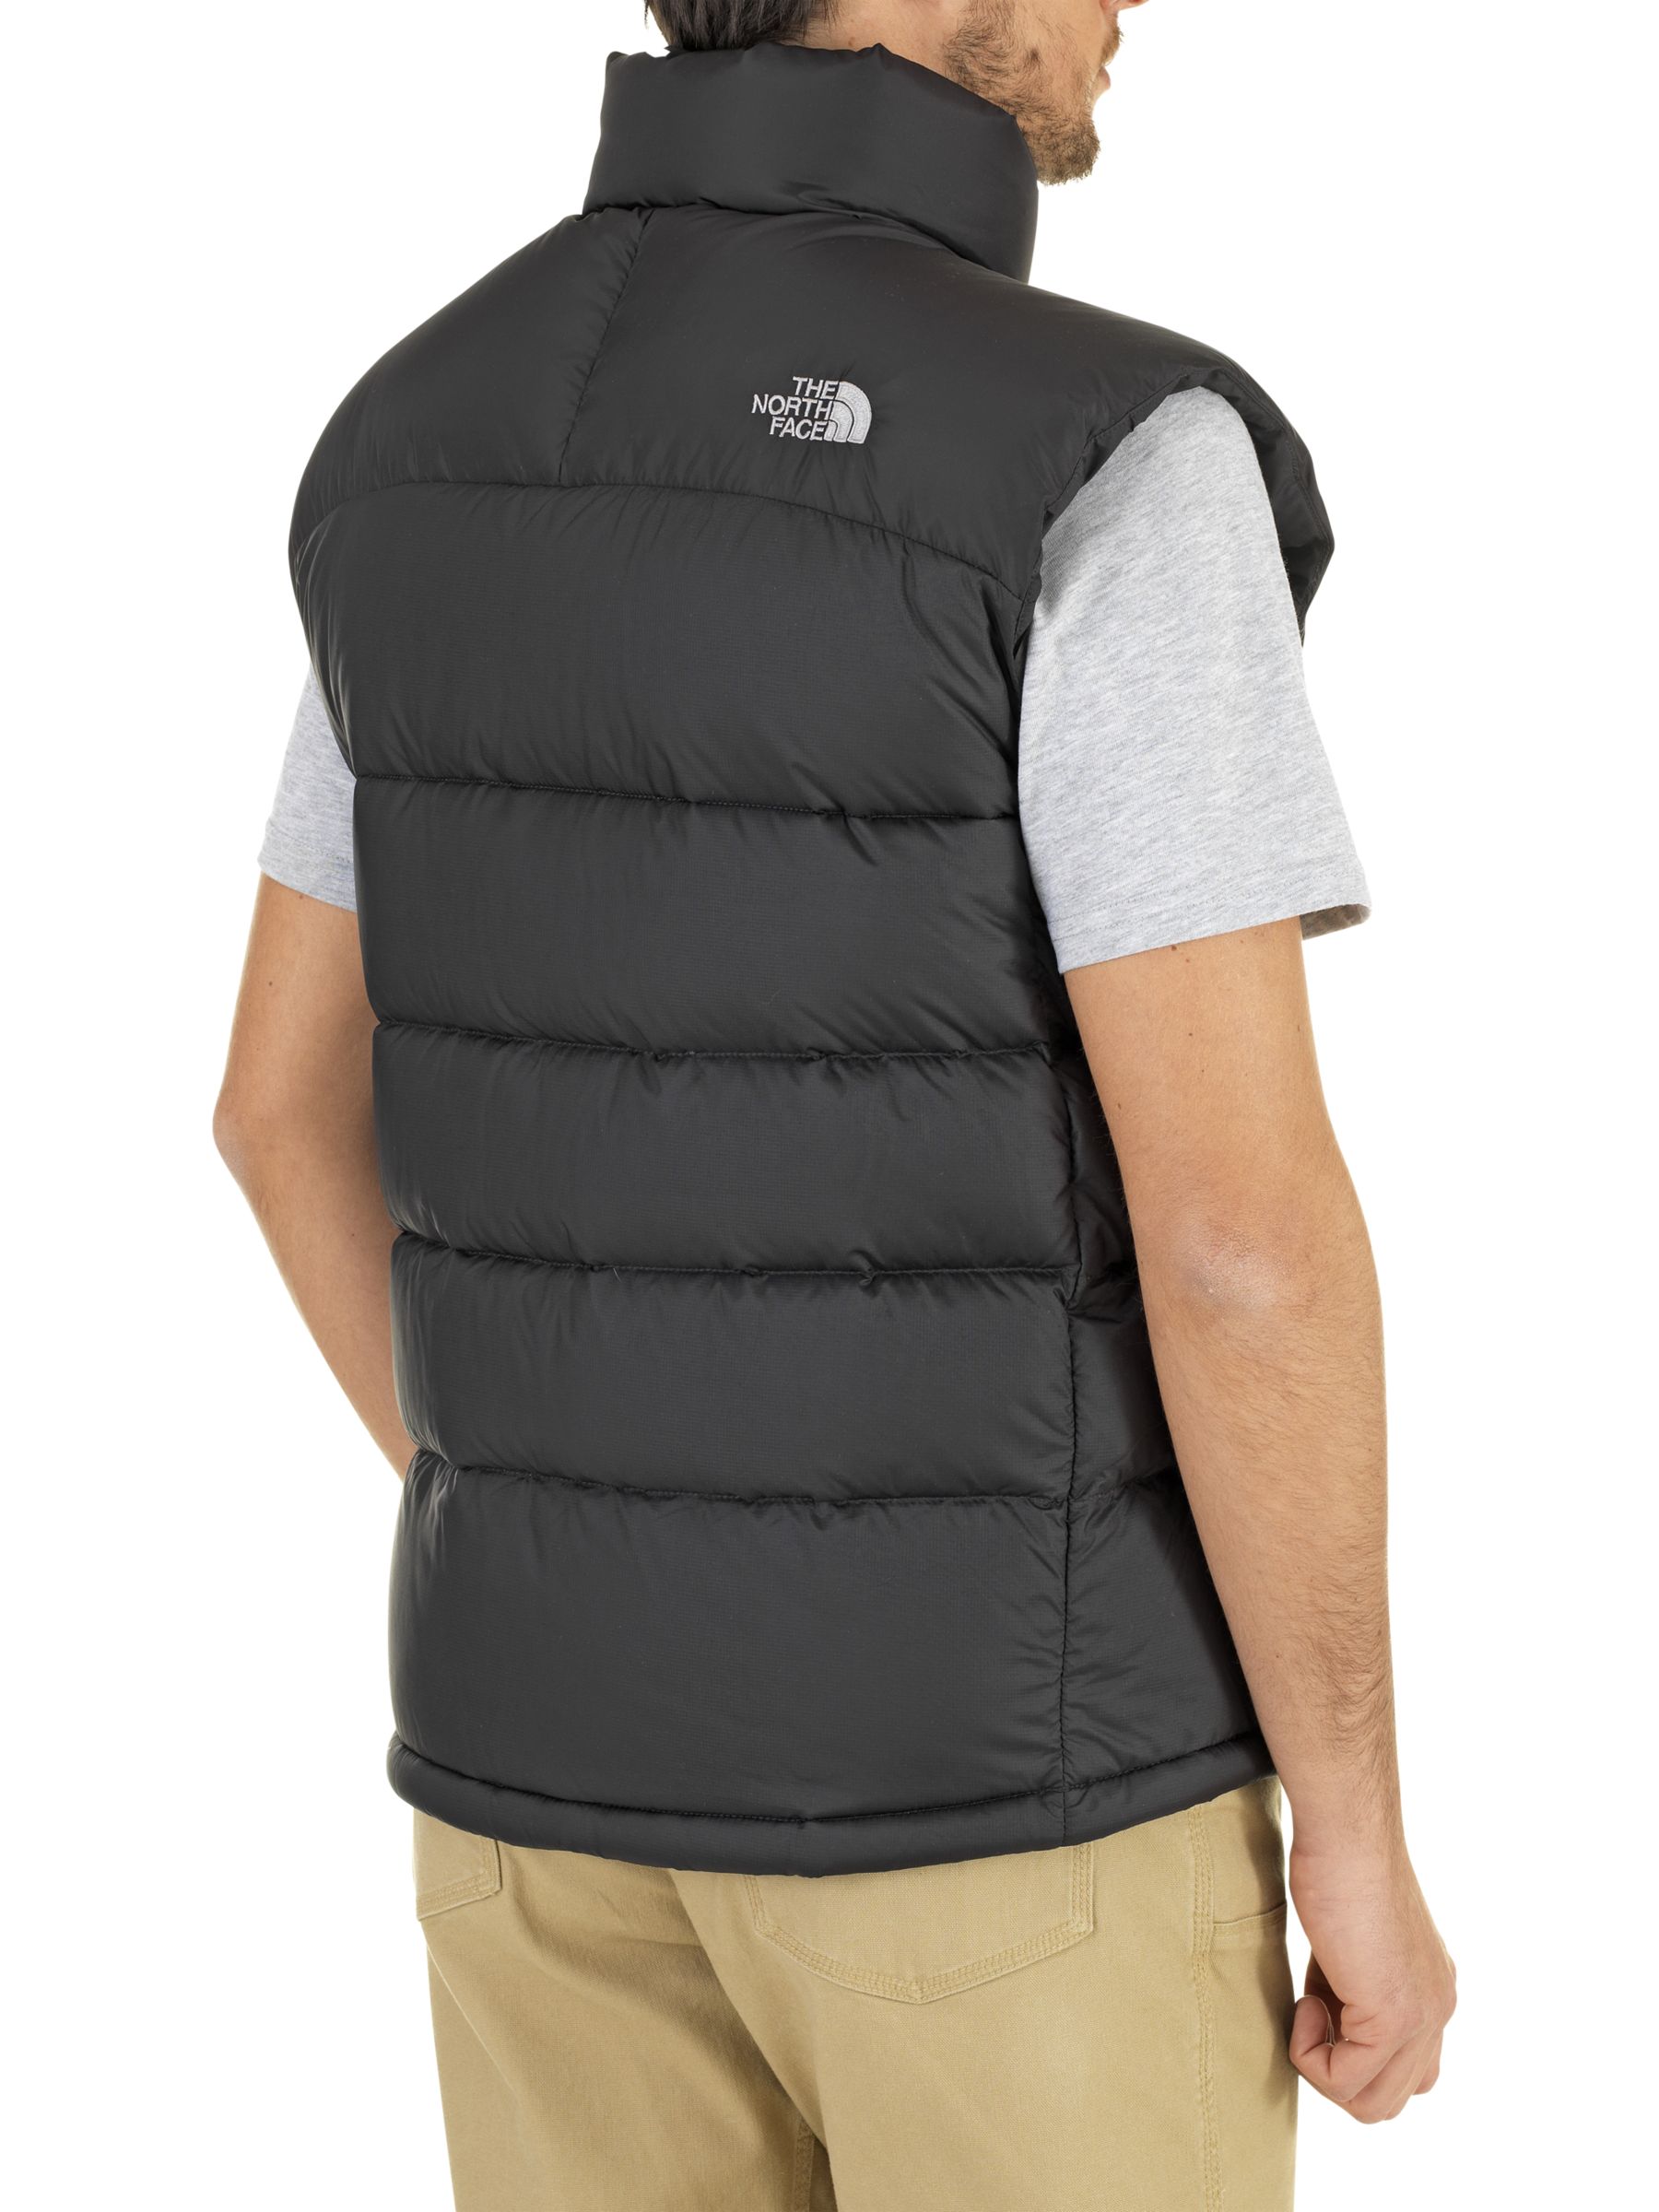 mens the north face body warmer